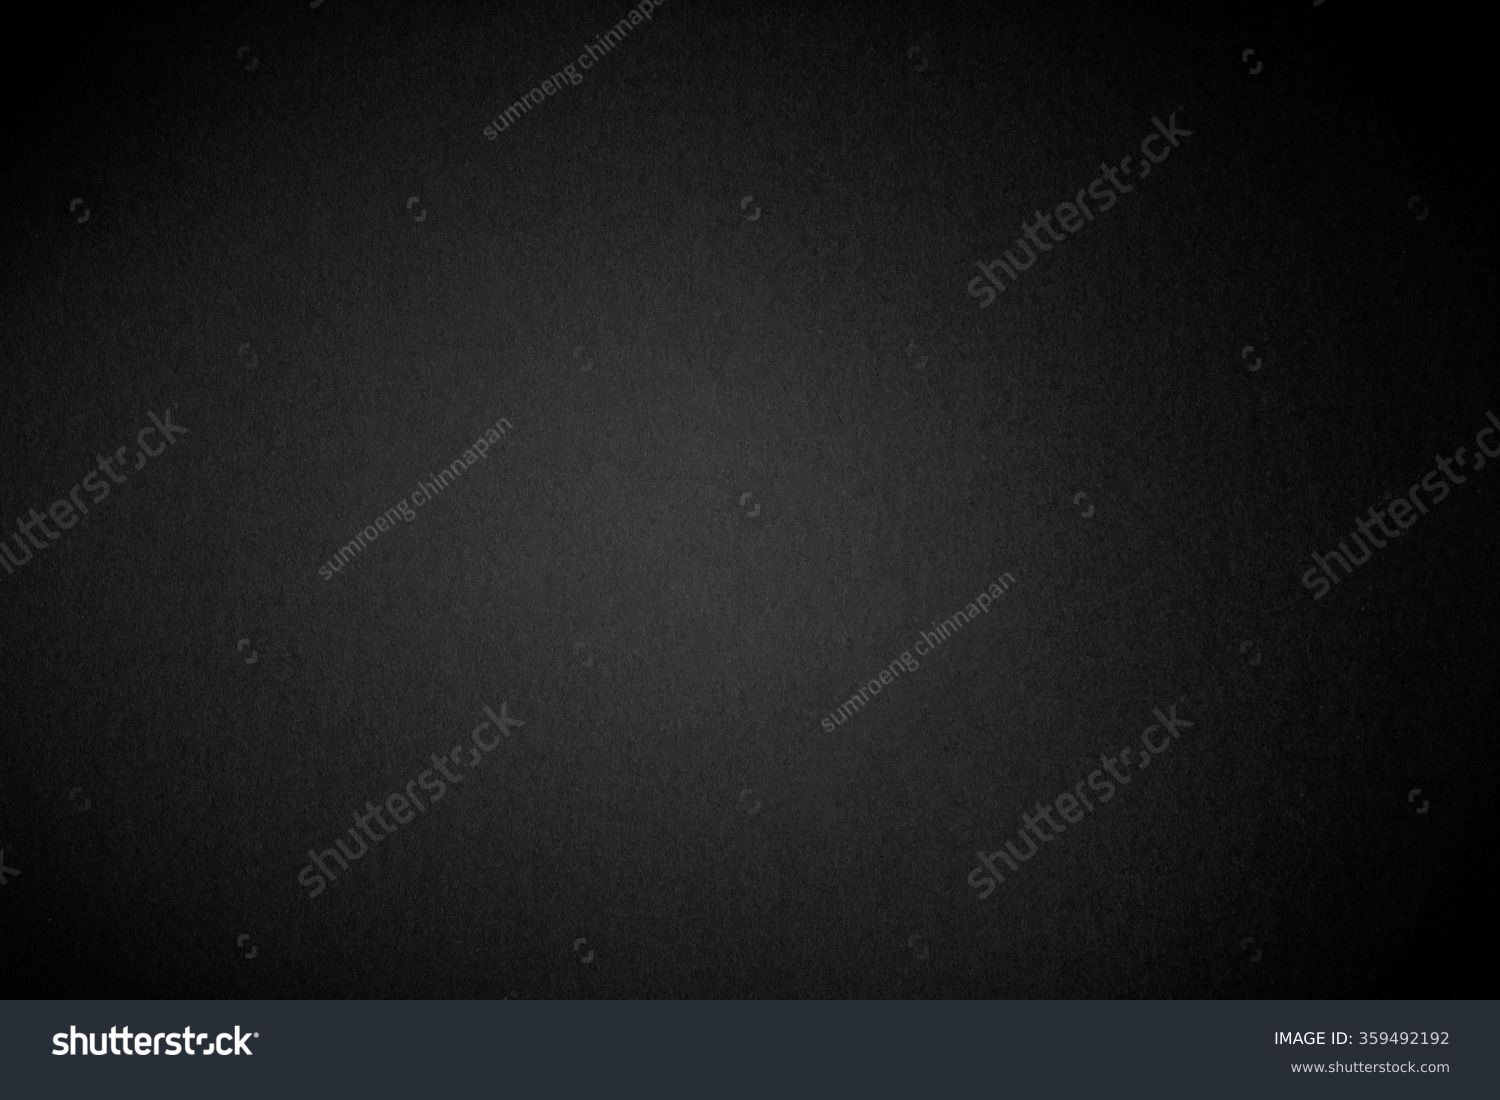 abstract black background, #359492192